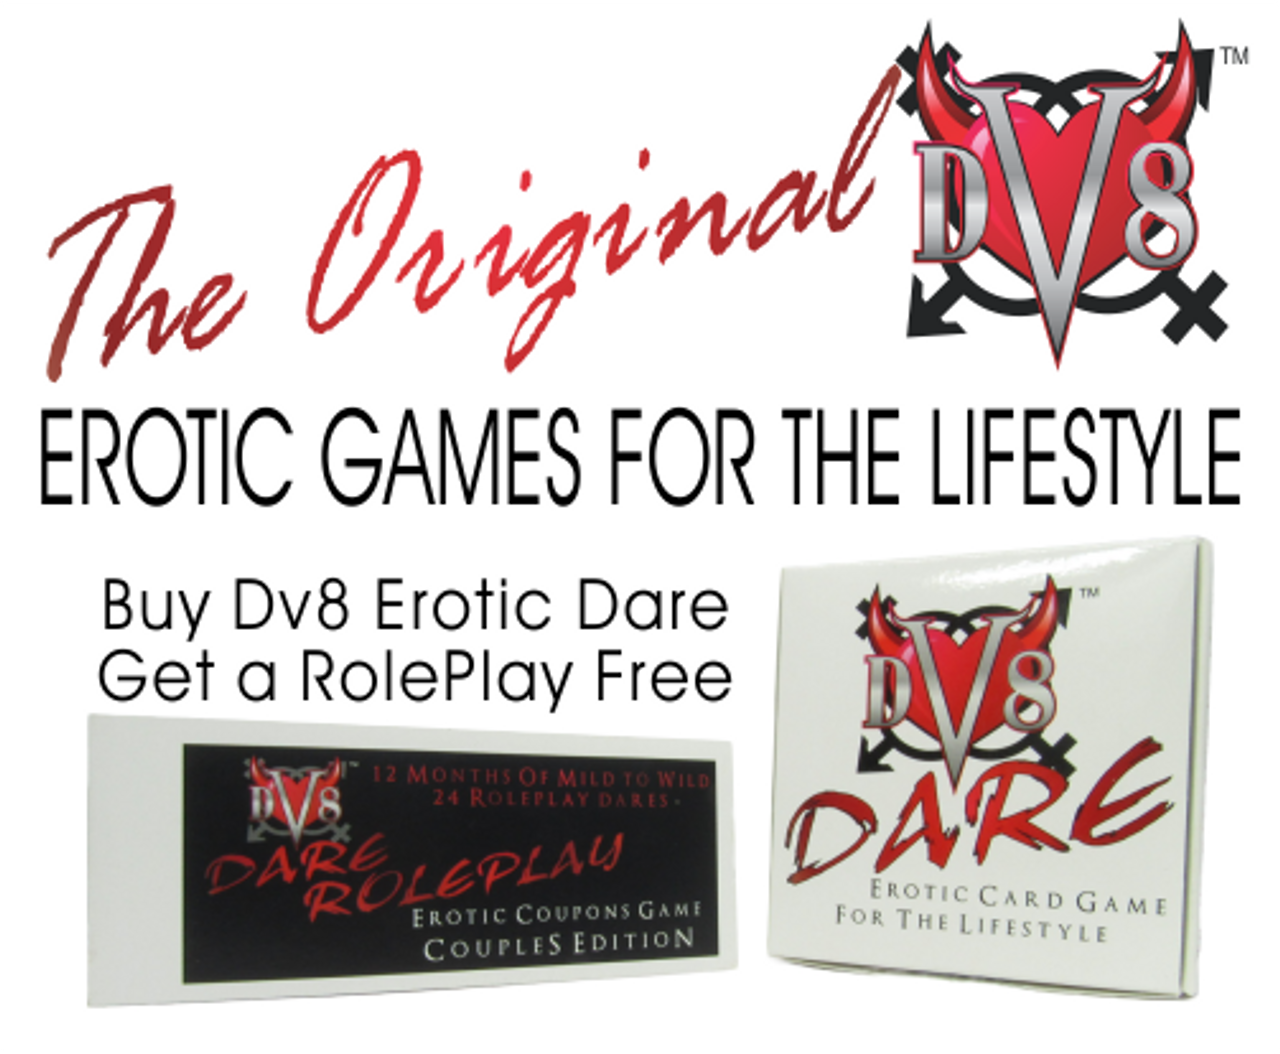 DV8 Erotic Dare for the Lifestyle and DV8 Dare Roleplay Couple Coupon Game bogo